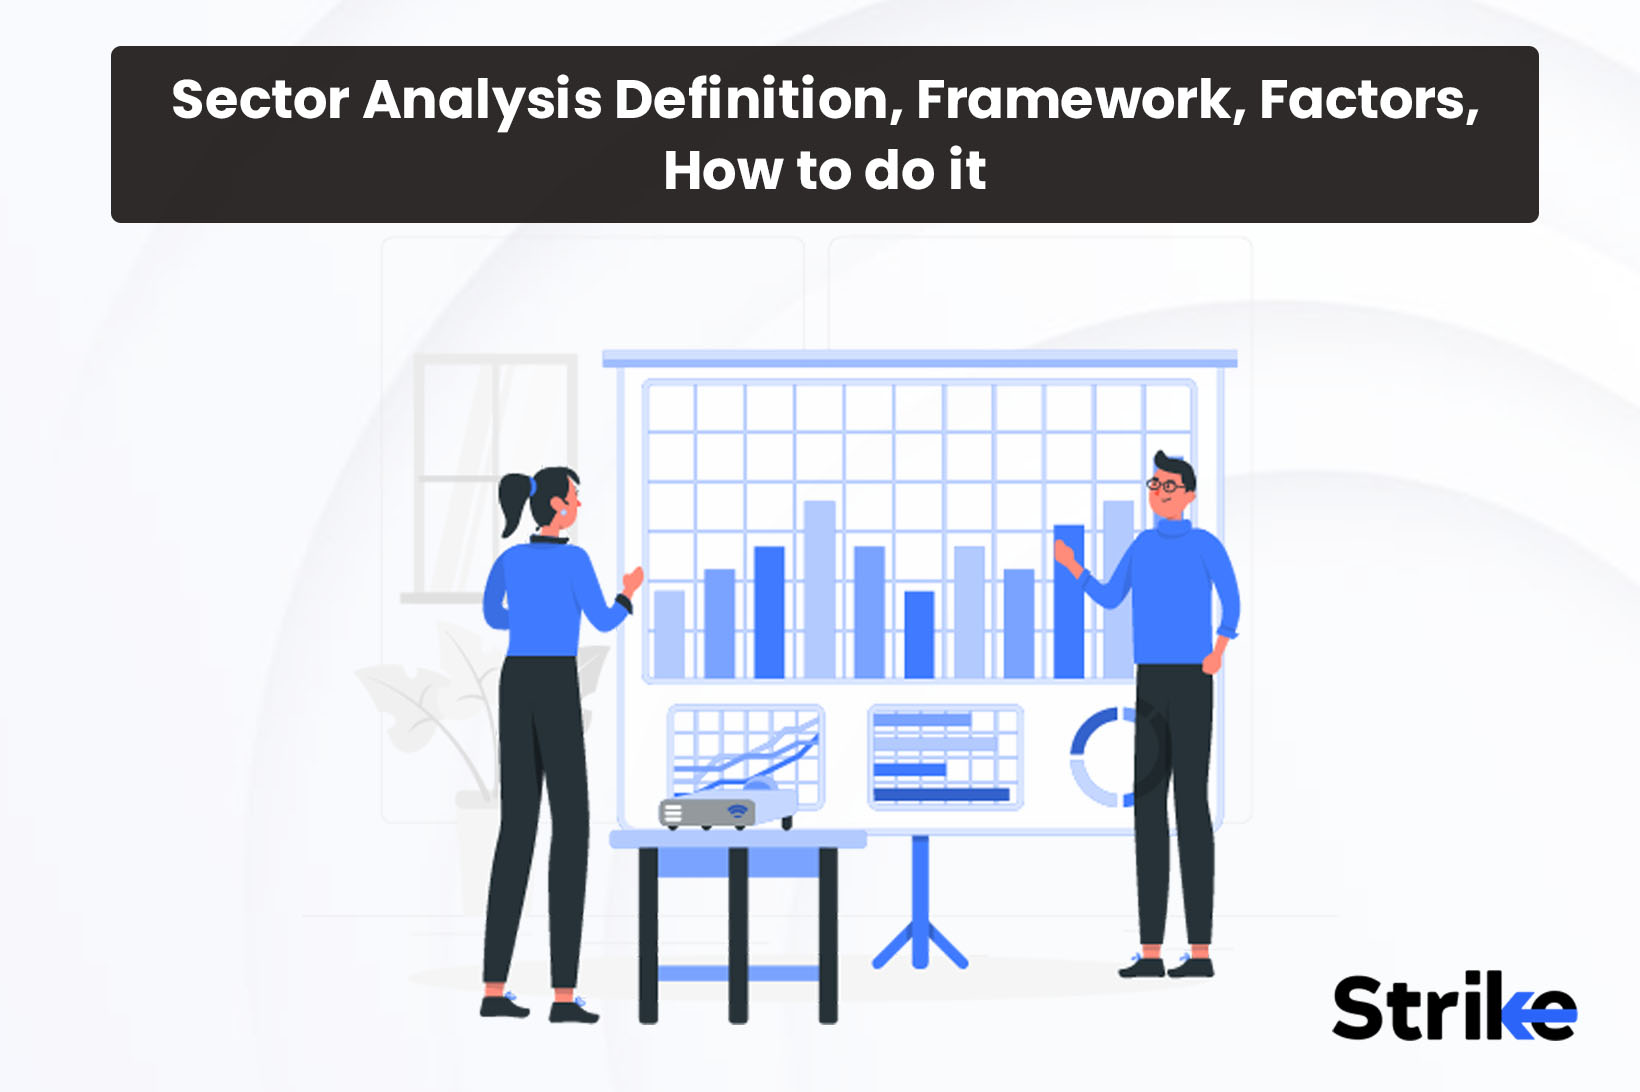 Sector Analysis: Definition, Framework, Factors, How to do it